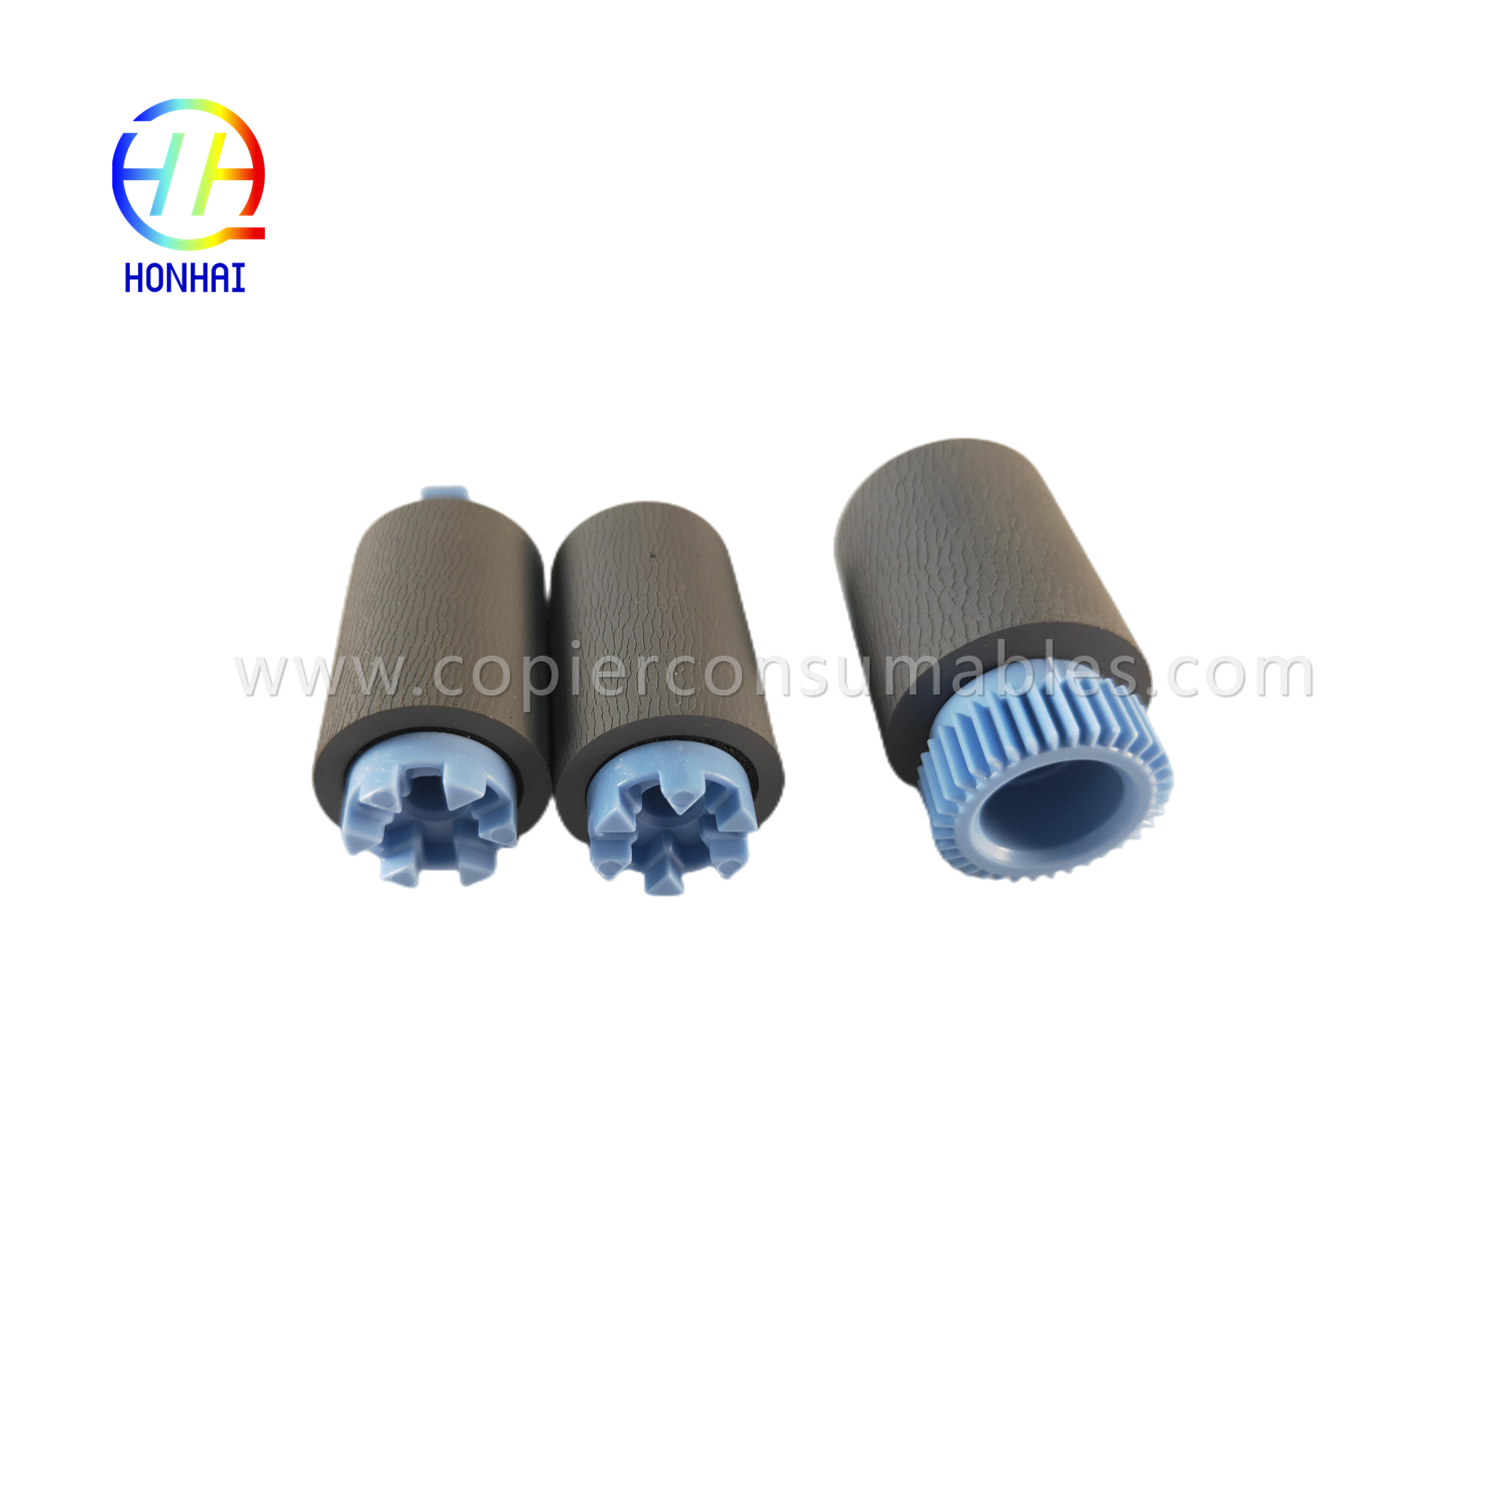 https://www.copierconsumables.com/tray-2-5-pickup-feed-separation-roller-set-for-hp-a7w93-67082-mfp-785f-780dn-e77650z-e77660z-e77650dn-e77660dn-p77740dn- p77750z-p77760z-p75050dn-p75050dw-produk/